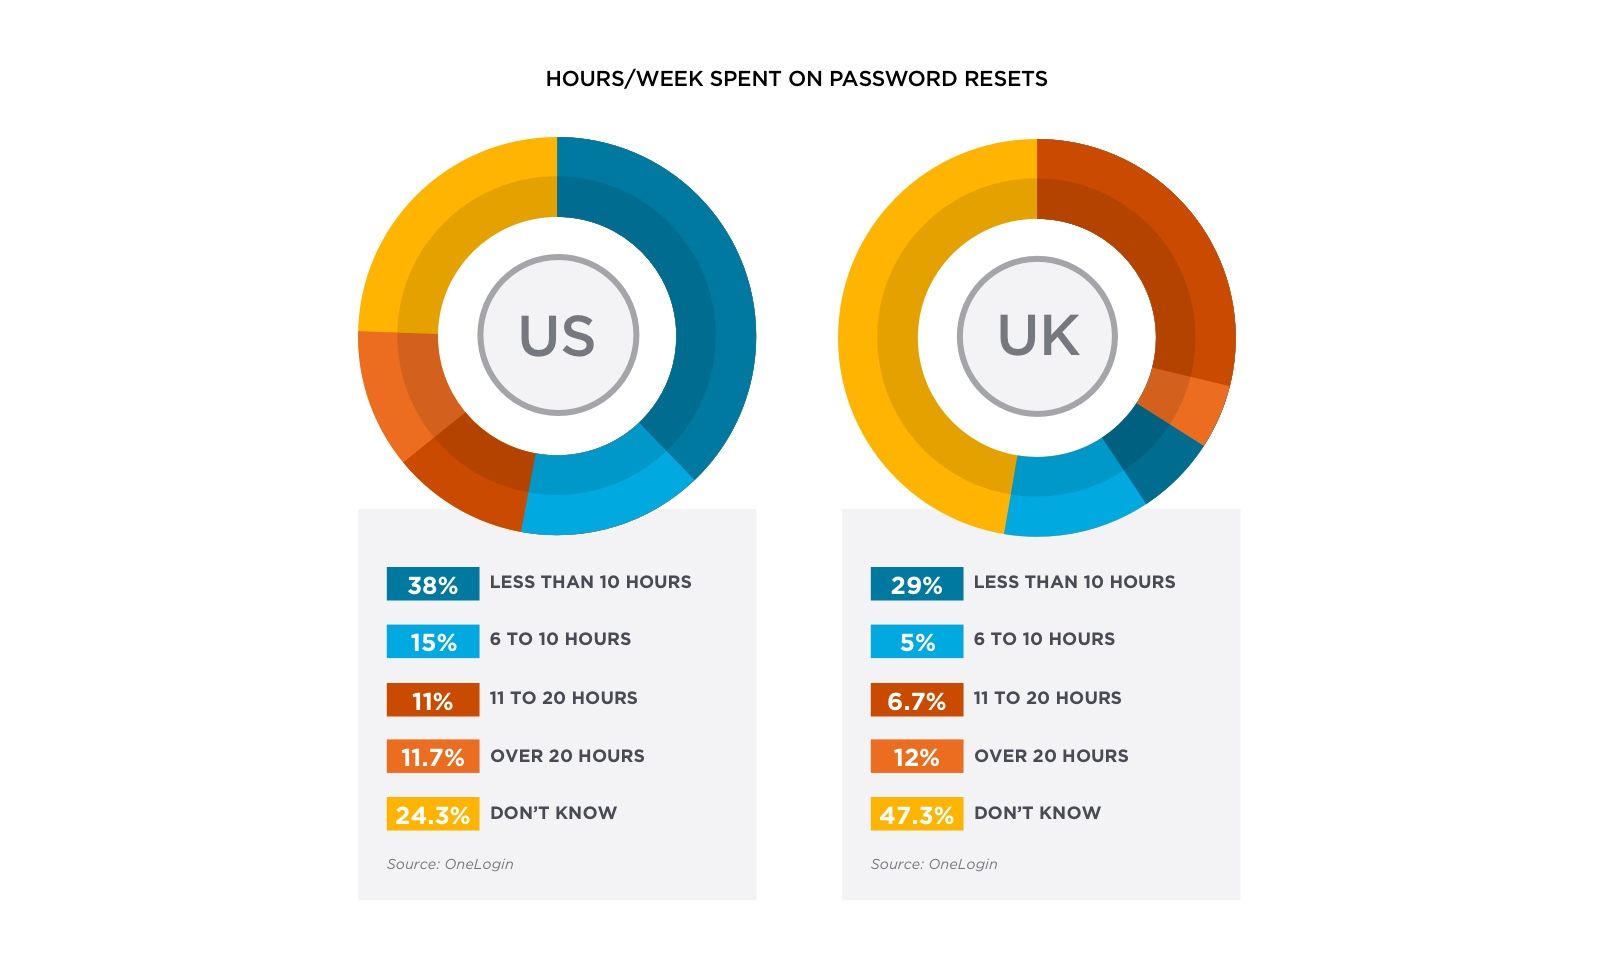 Hours per week spent on password resets in the US & UK